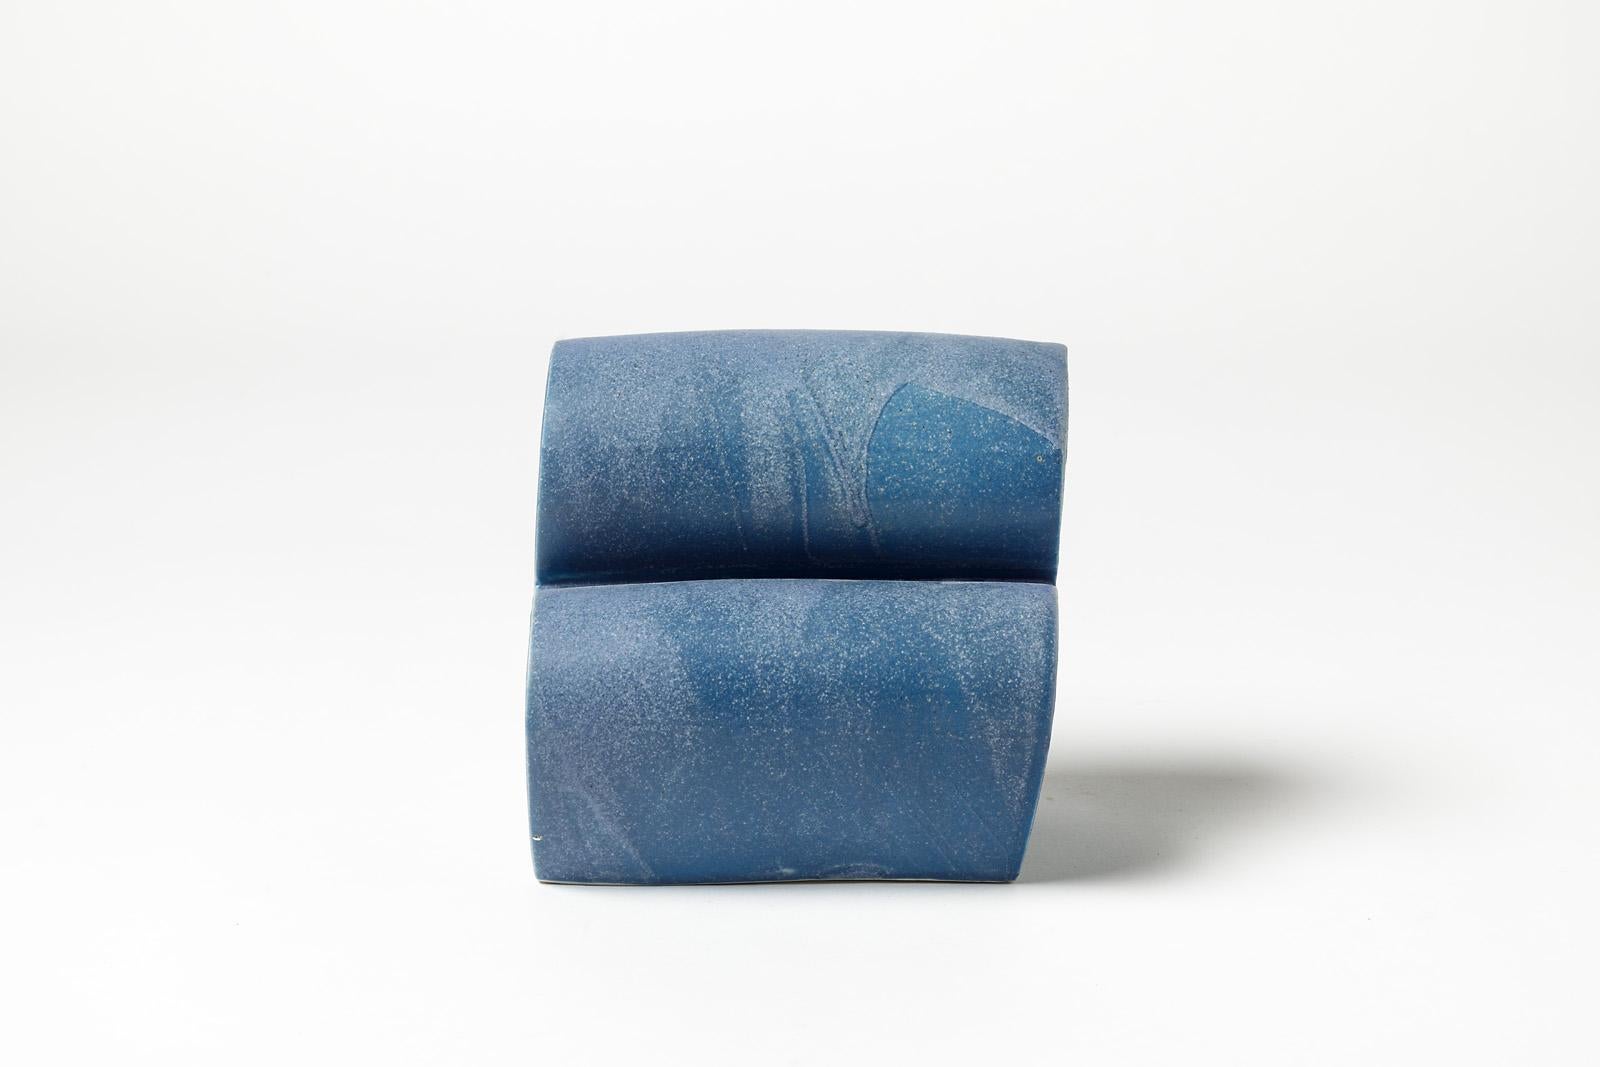 Julia Huteau (Born in 1982).

Contemporary ceramic by the French artist.

Abstract blue ceramic form with beautiful ceramic glaze effects.

Signed under the base.

Dimensions: 14 x 14 x 12 cm.